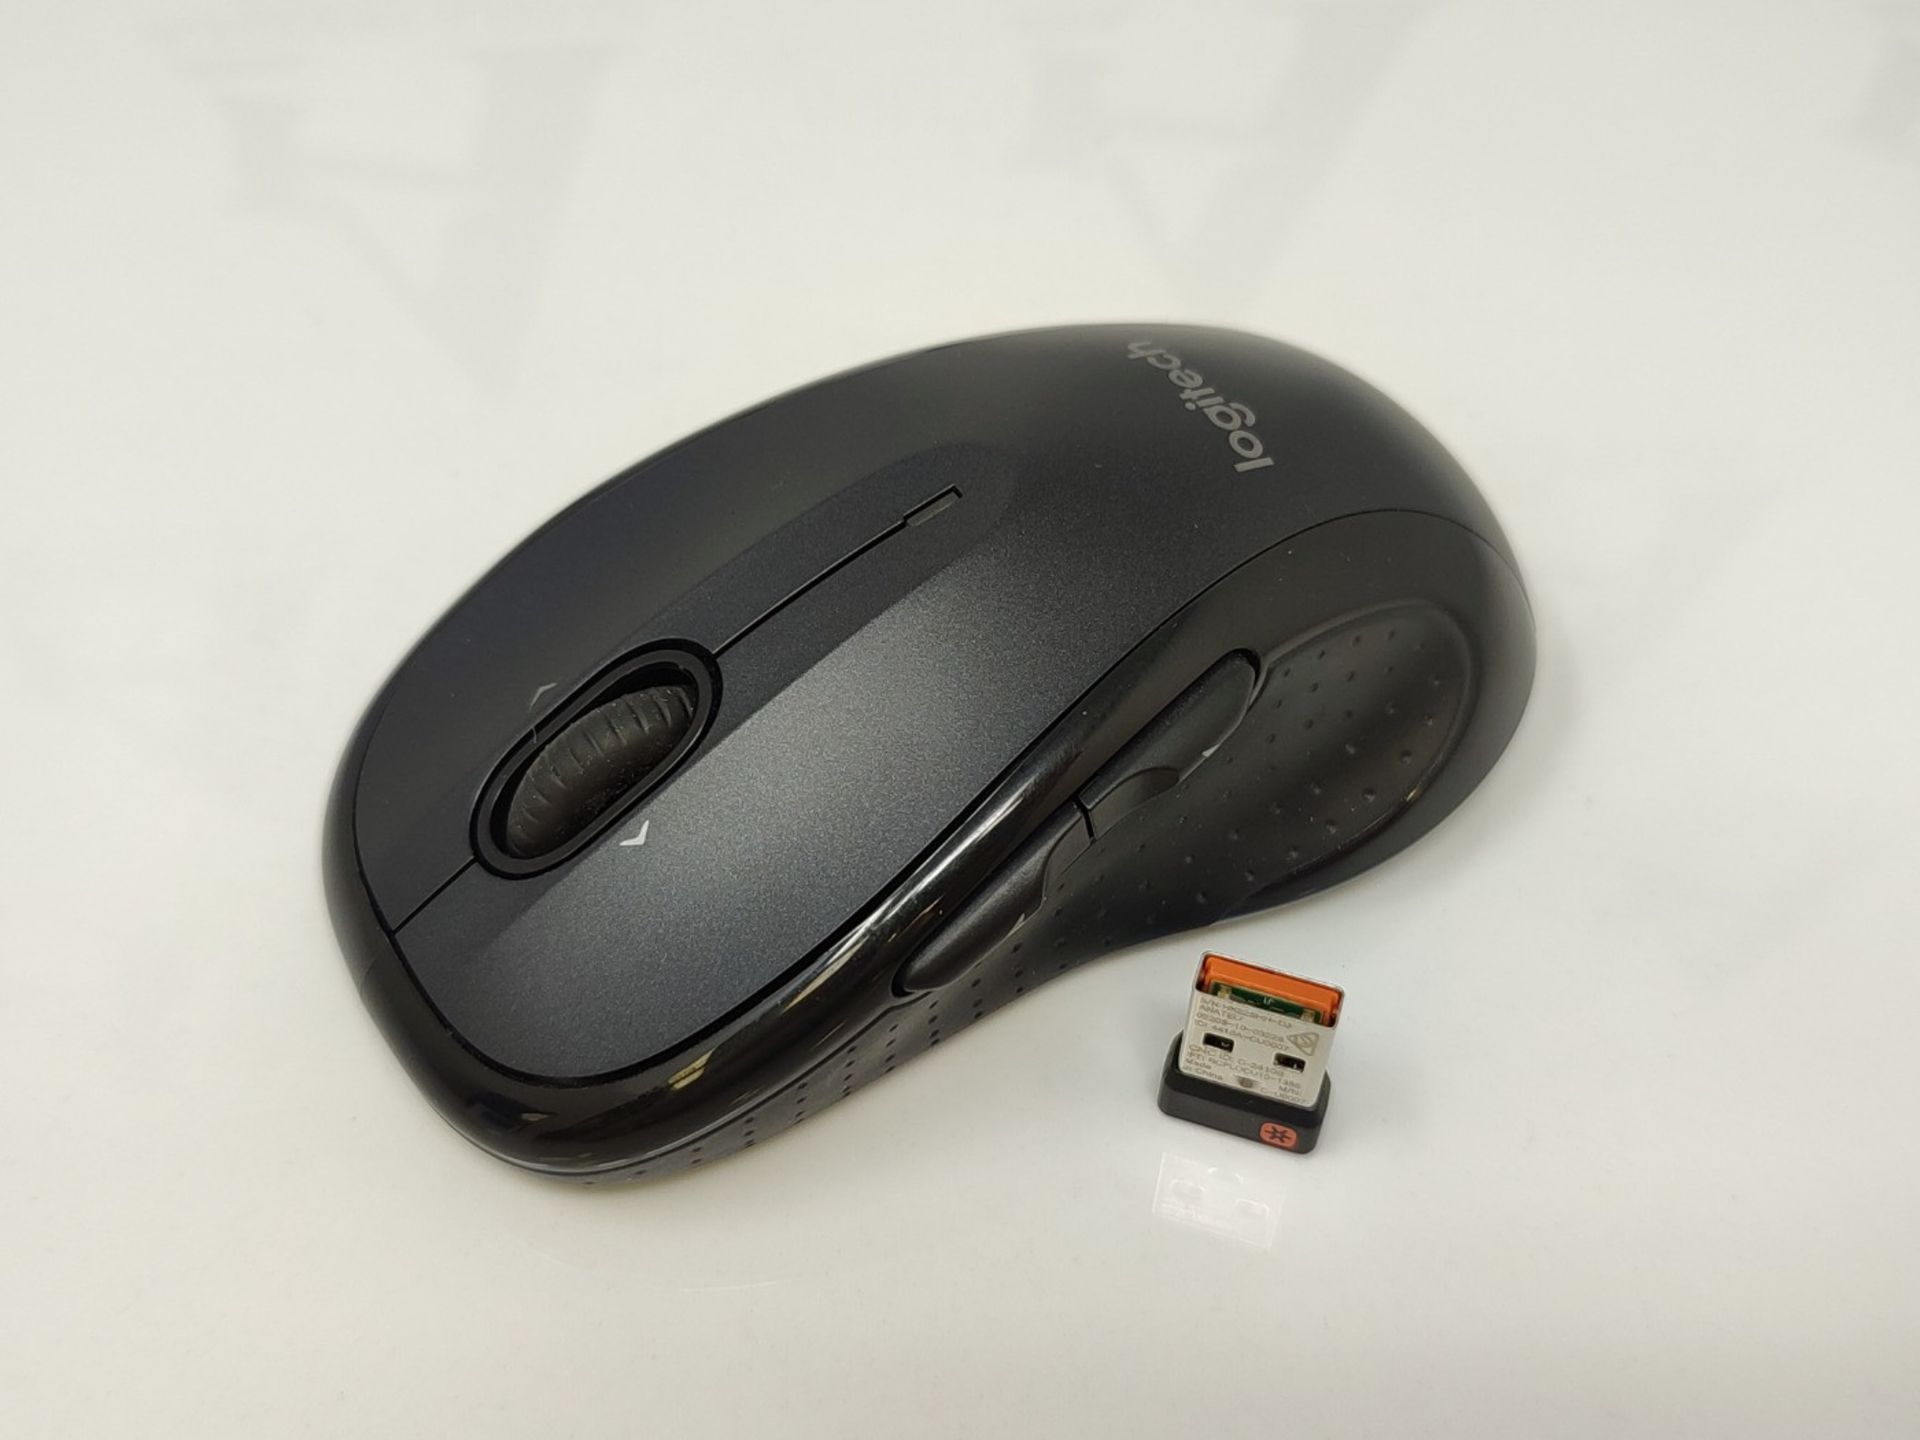 Logitech M510 Wireless Mouse, 2.4 GHz with USB Unifying receiver, 1000 DPI with laser - Image 2 of 2